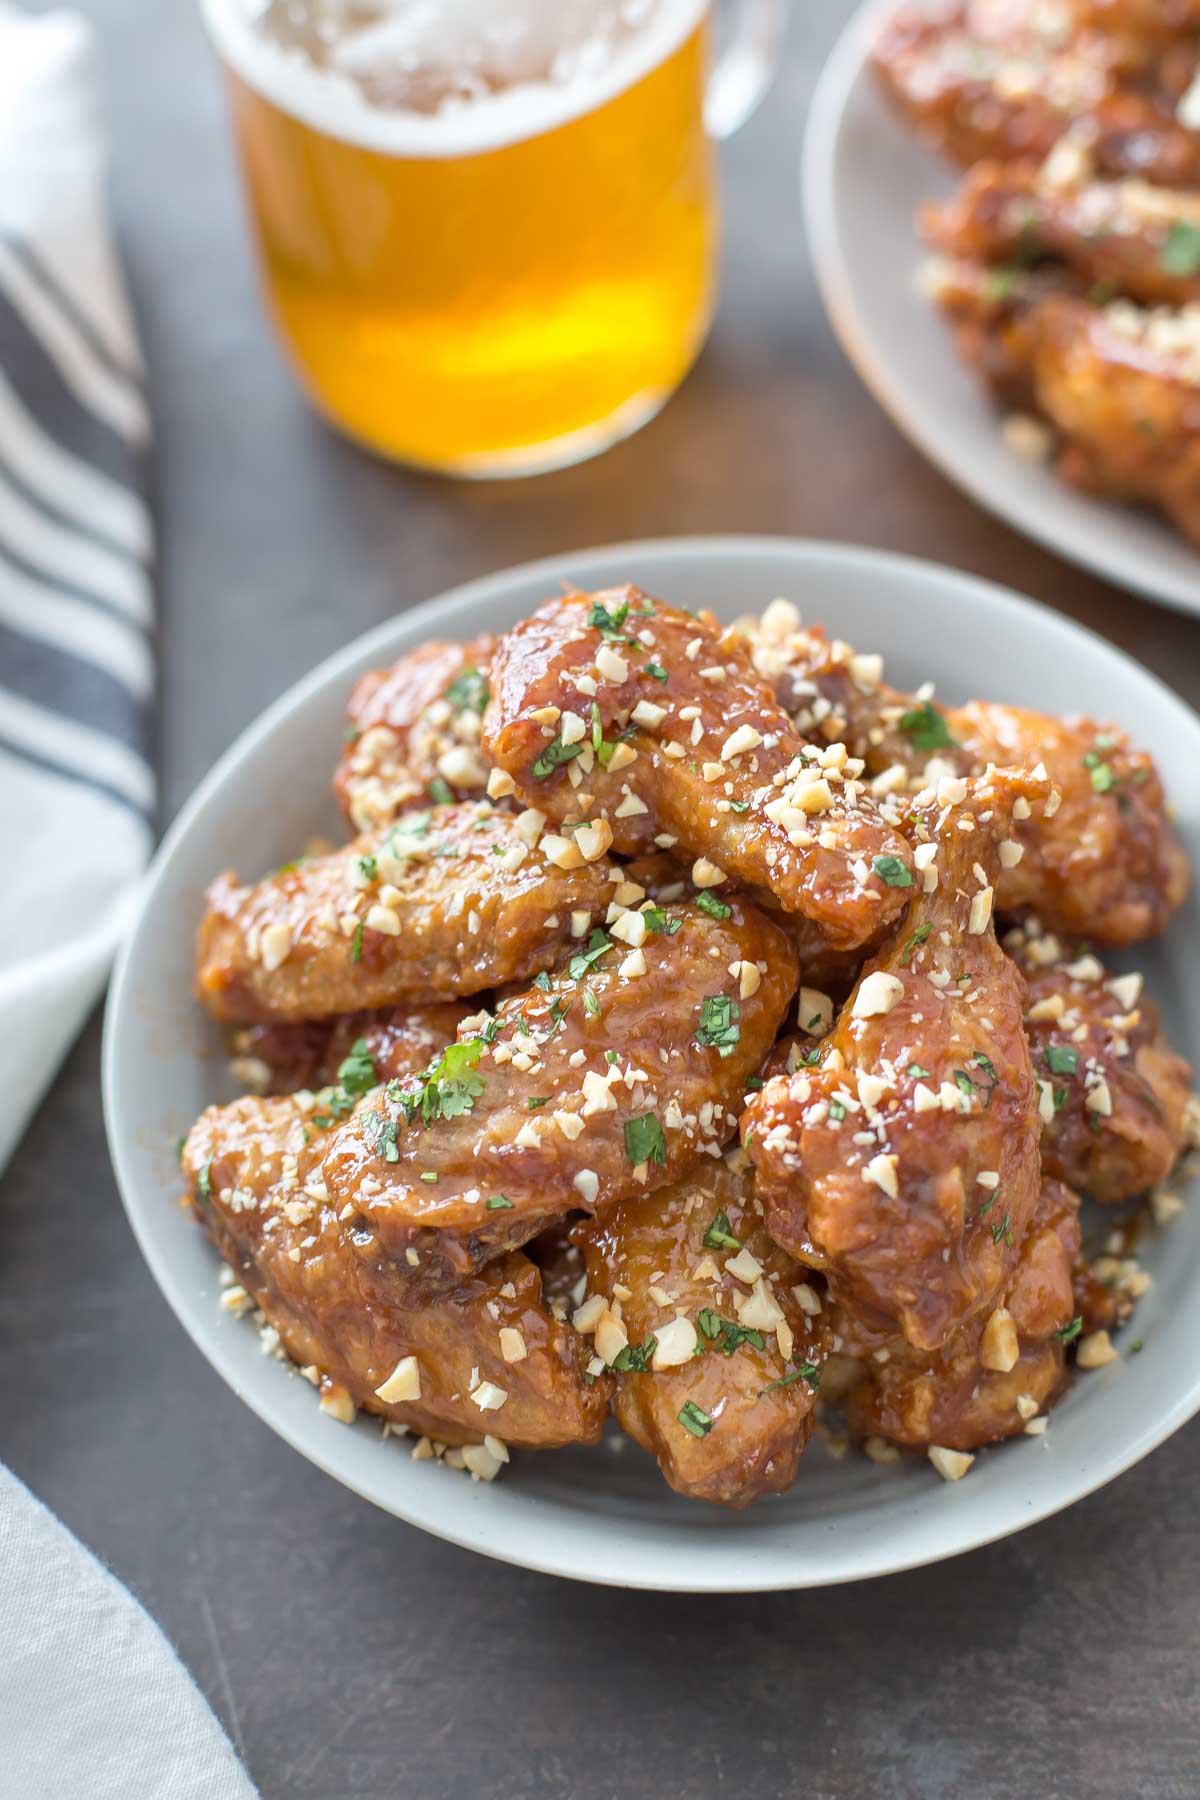 Oven Baked Peanut Butter and Jelly Wings